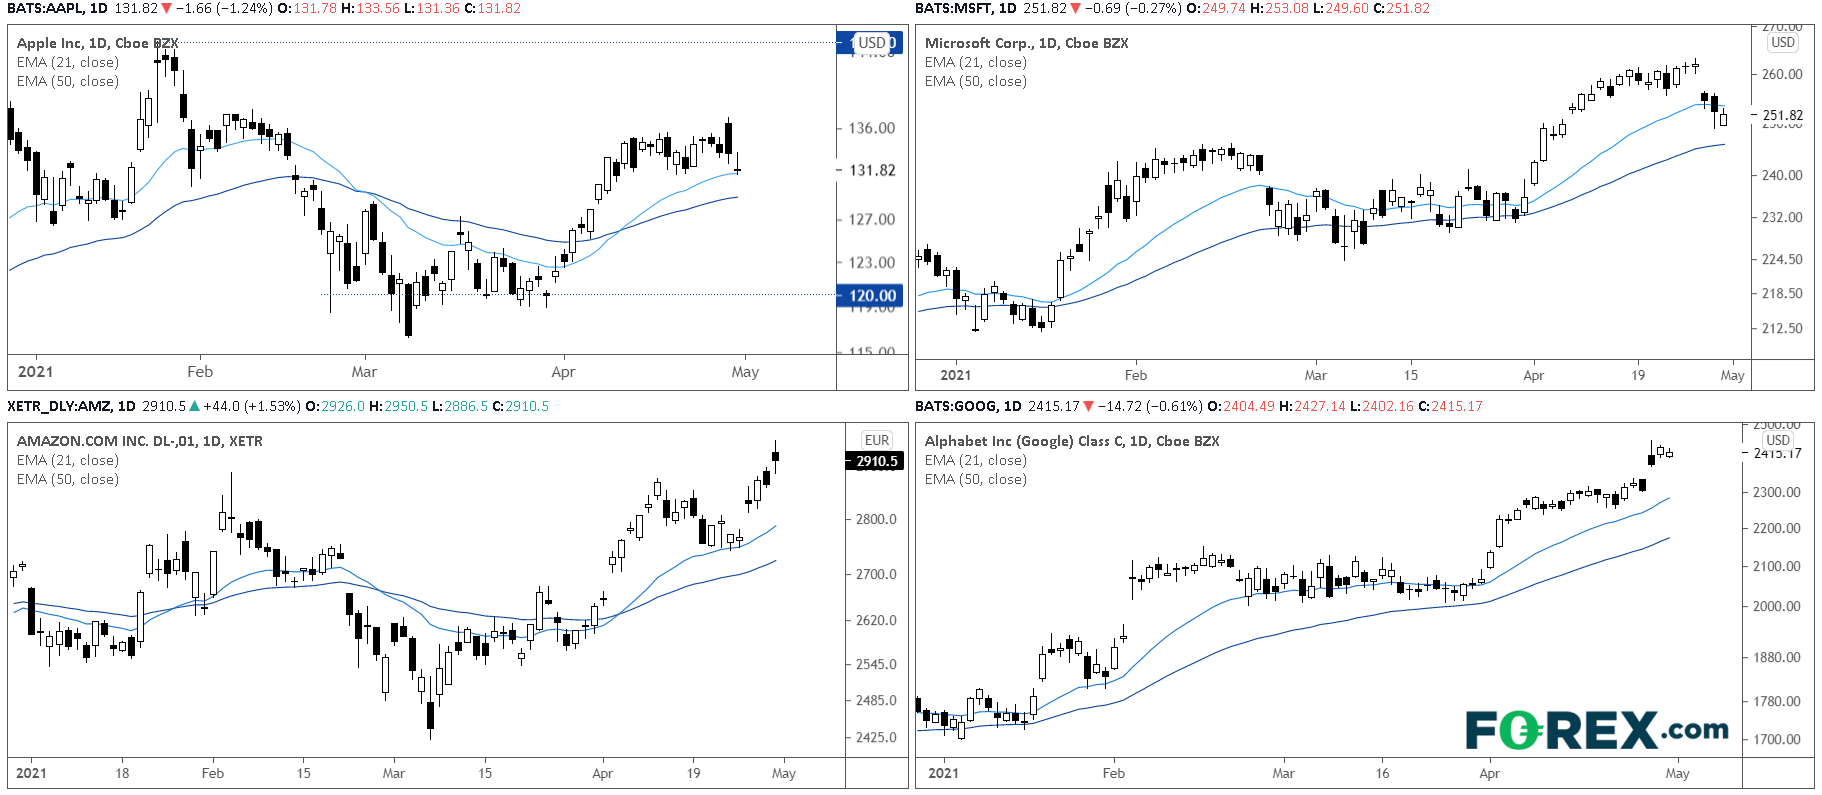 Chart analysis comparing Apple, Amazon, Microsoft, Google. Published in April 2021 by FOREX.com